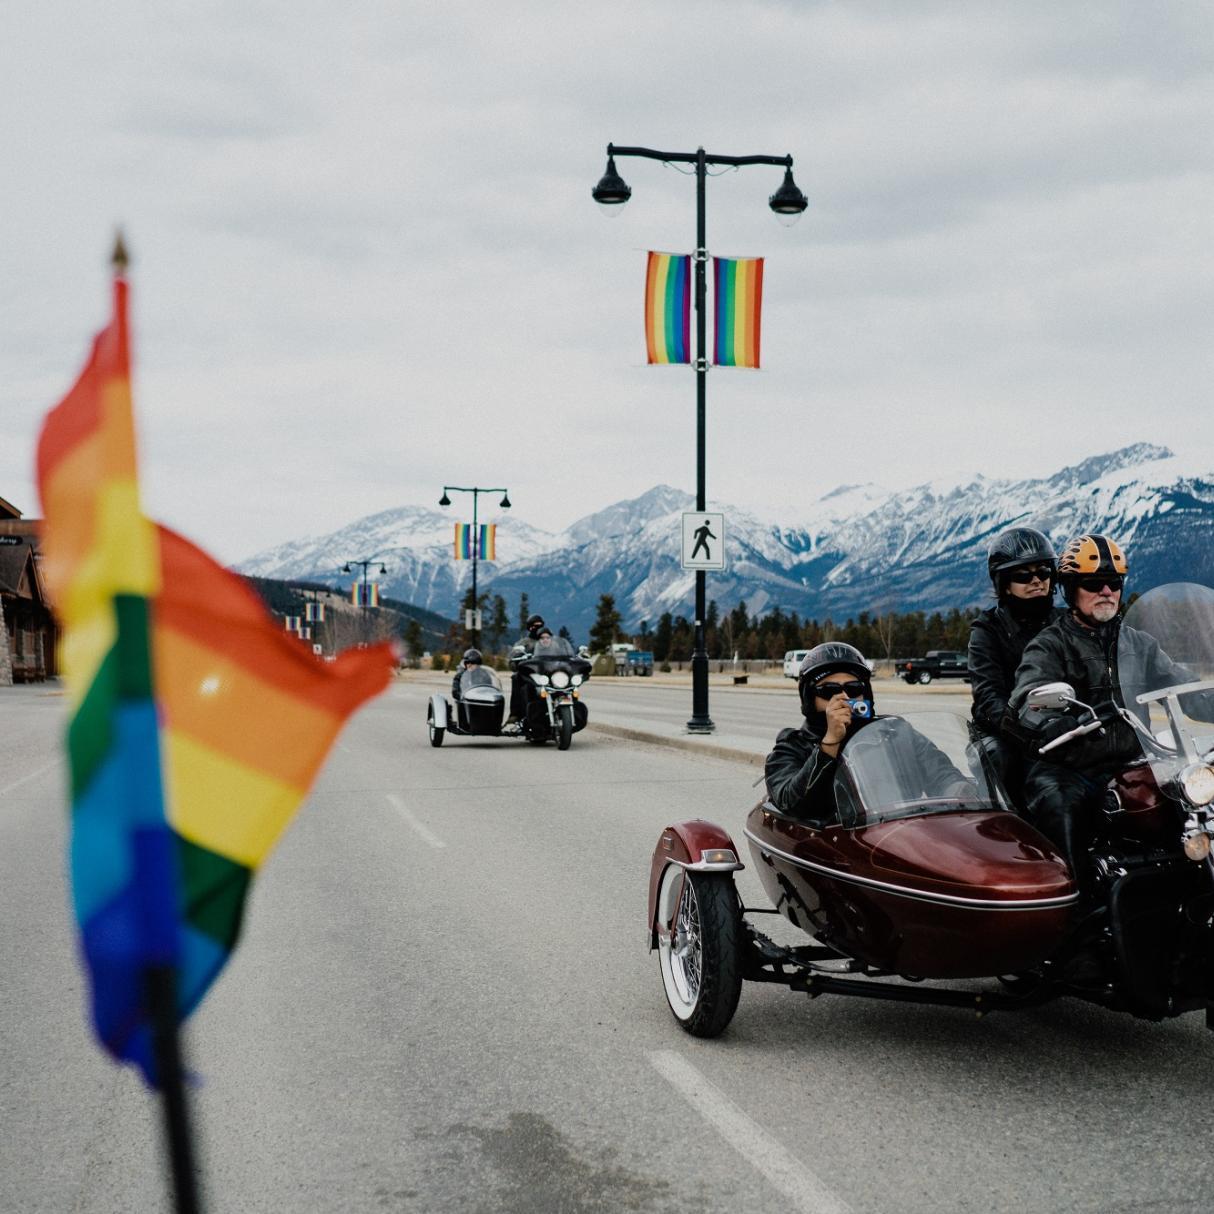 Motorcyclists celebrate pride with flags in Jasper